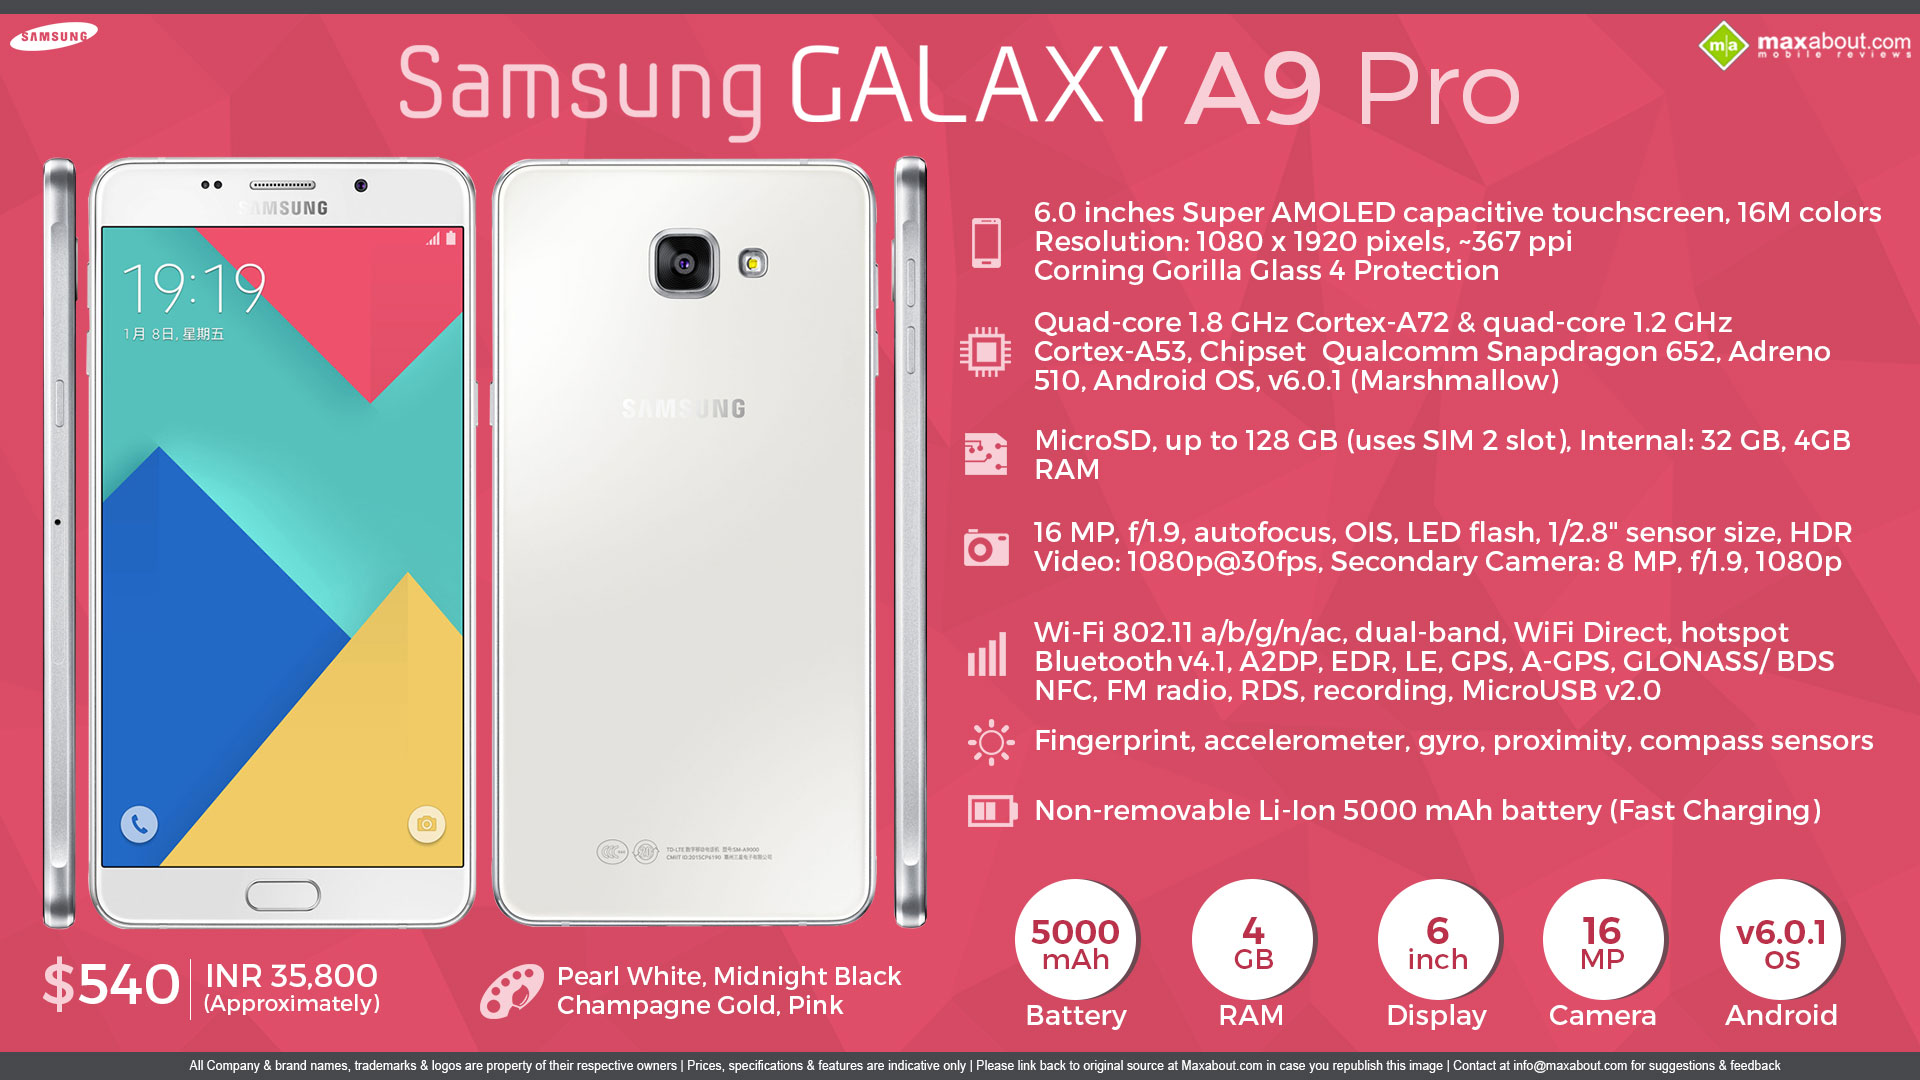 Quick Facts: Samsung Galaxy A9 Pro (2016)